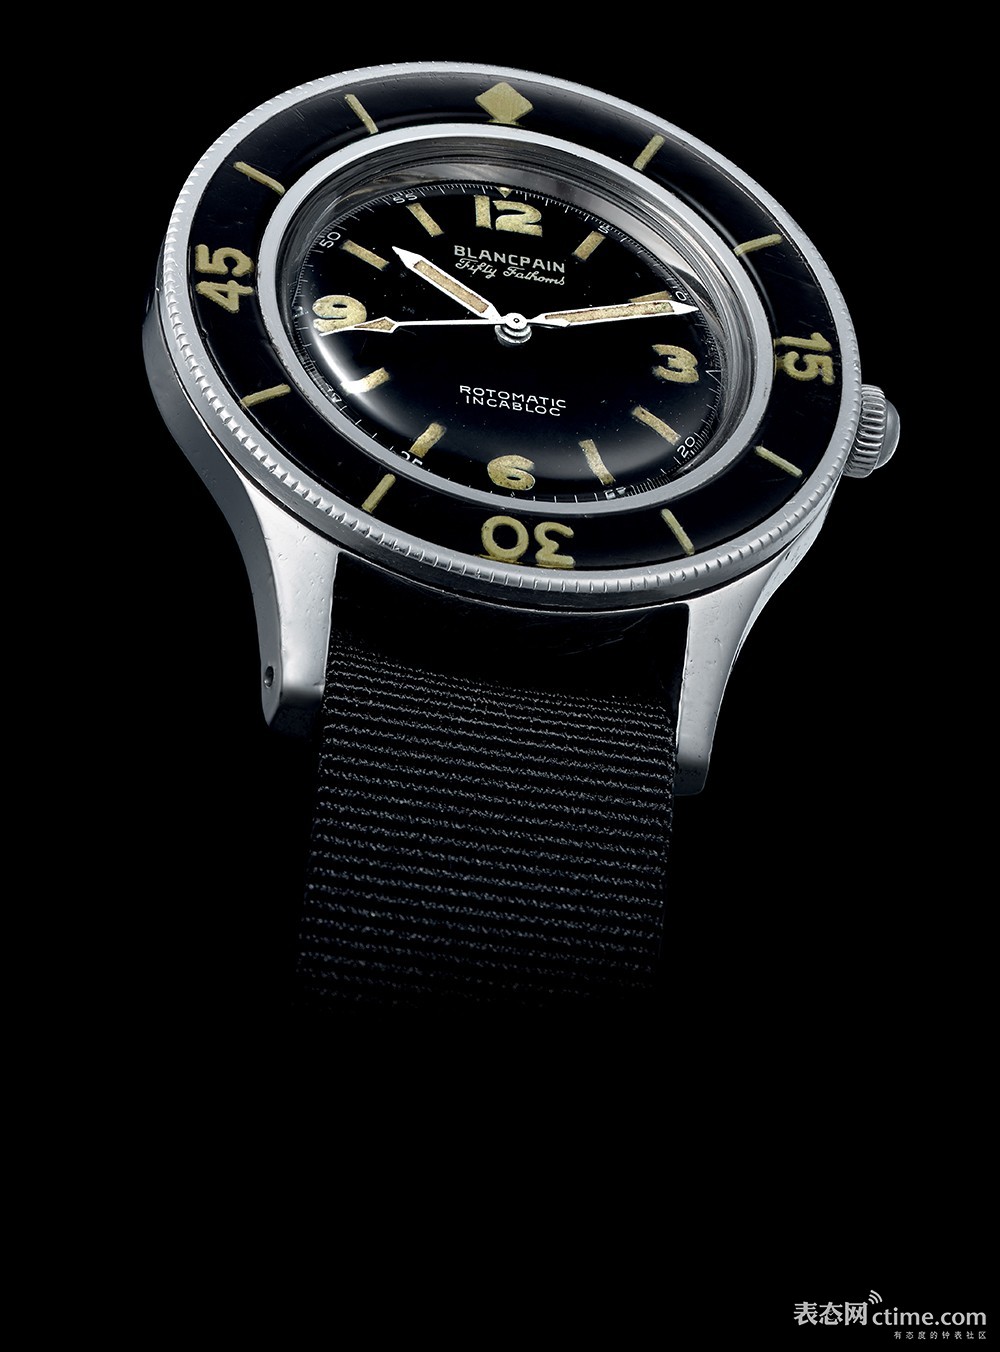 ©Blancpain, The original 1953 model of the Fifty Fathoms_2.jpg